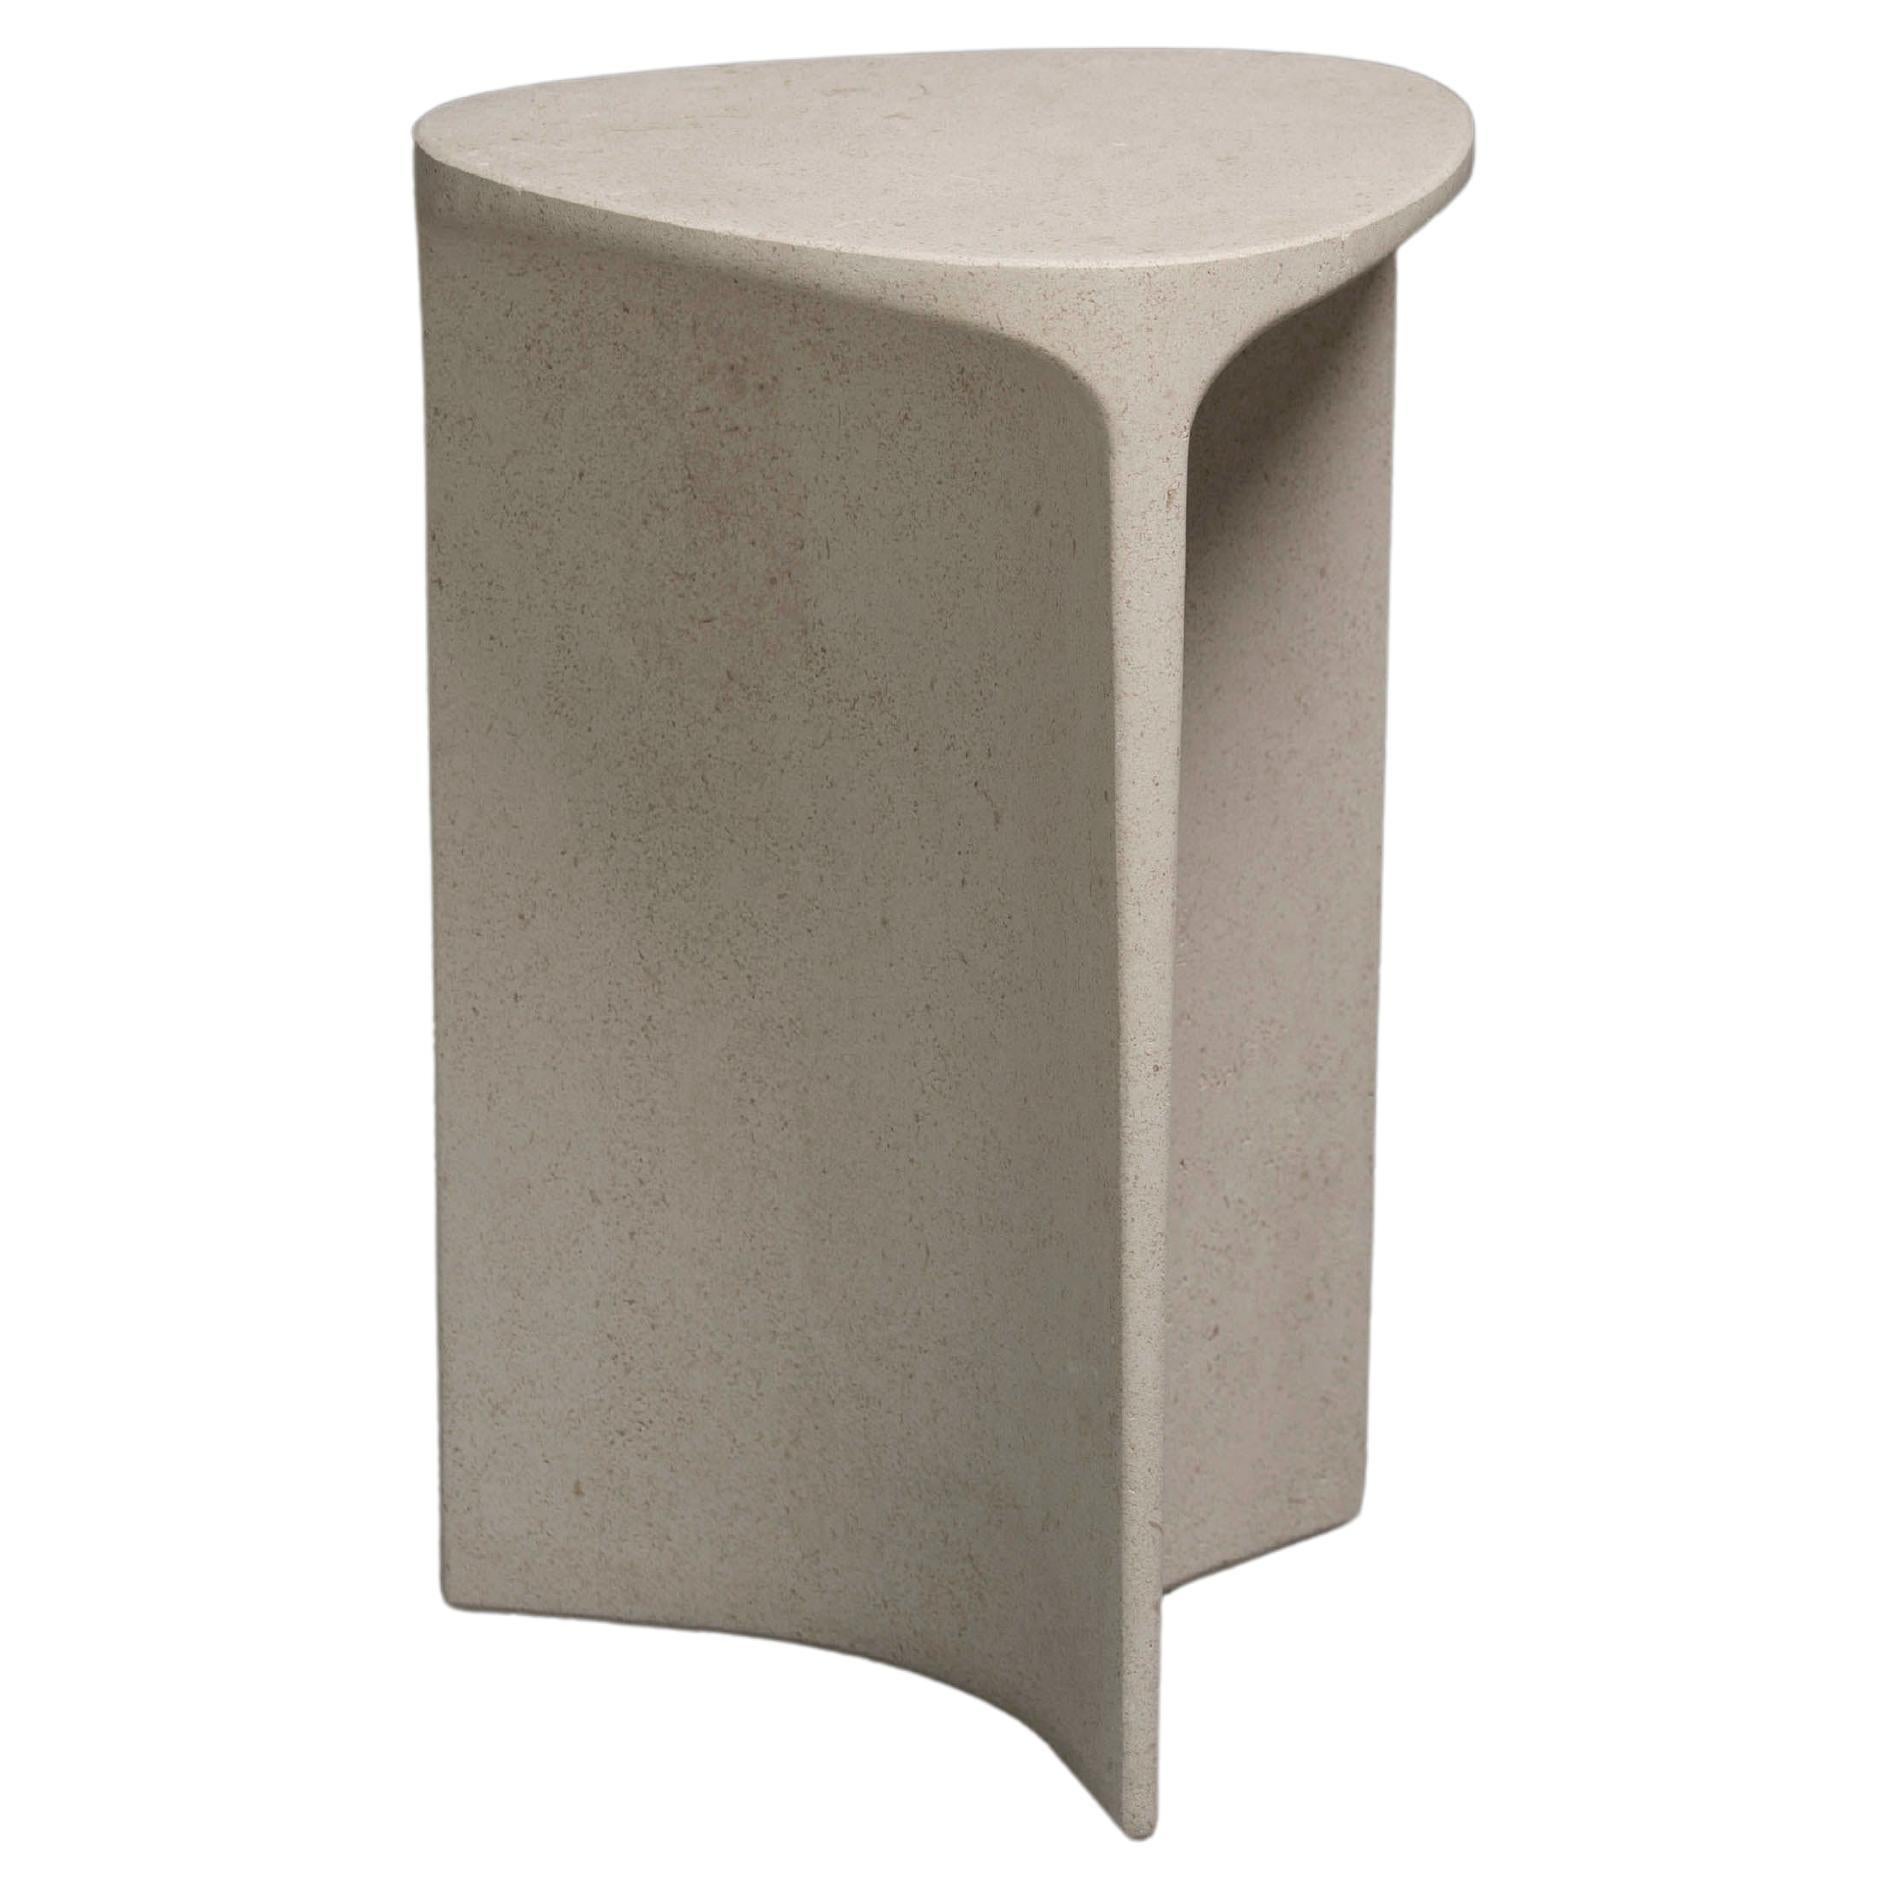 Side table Carv Tall in Chauvigny stone by Daniel Fintzi for Formar